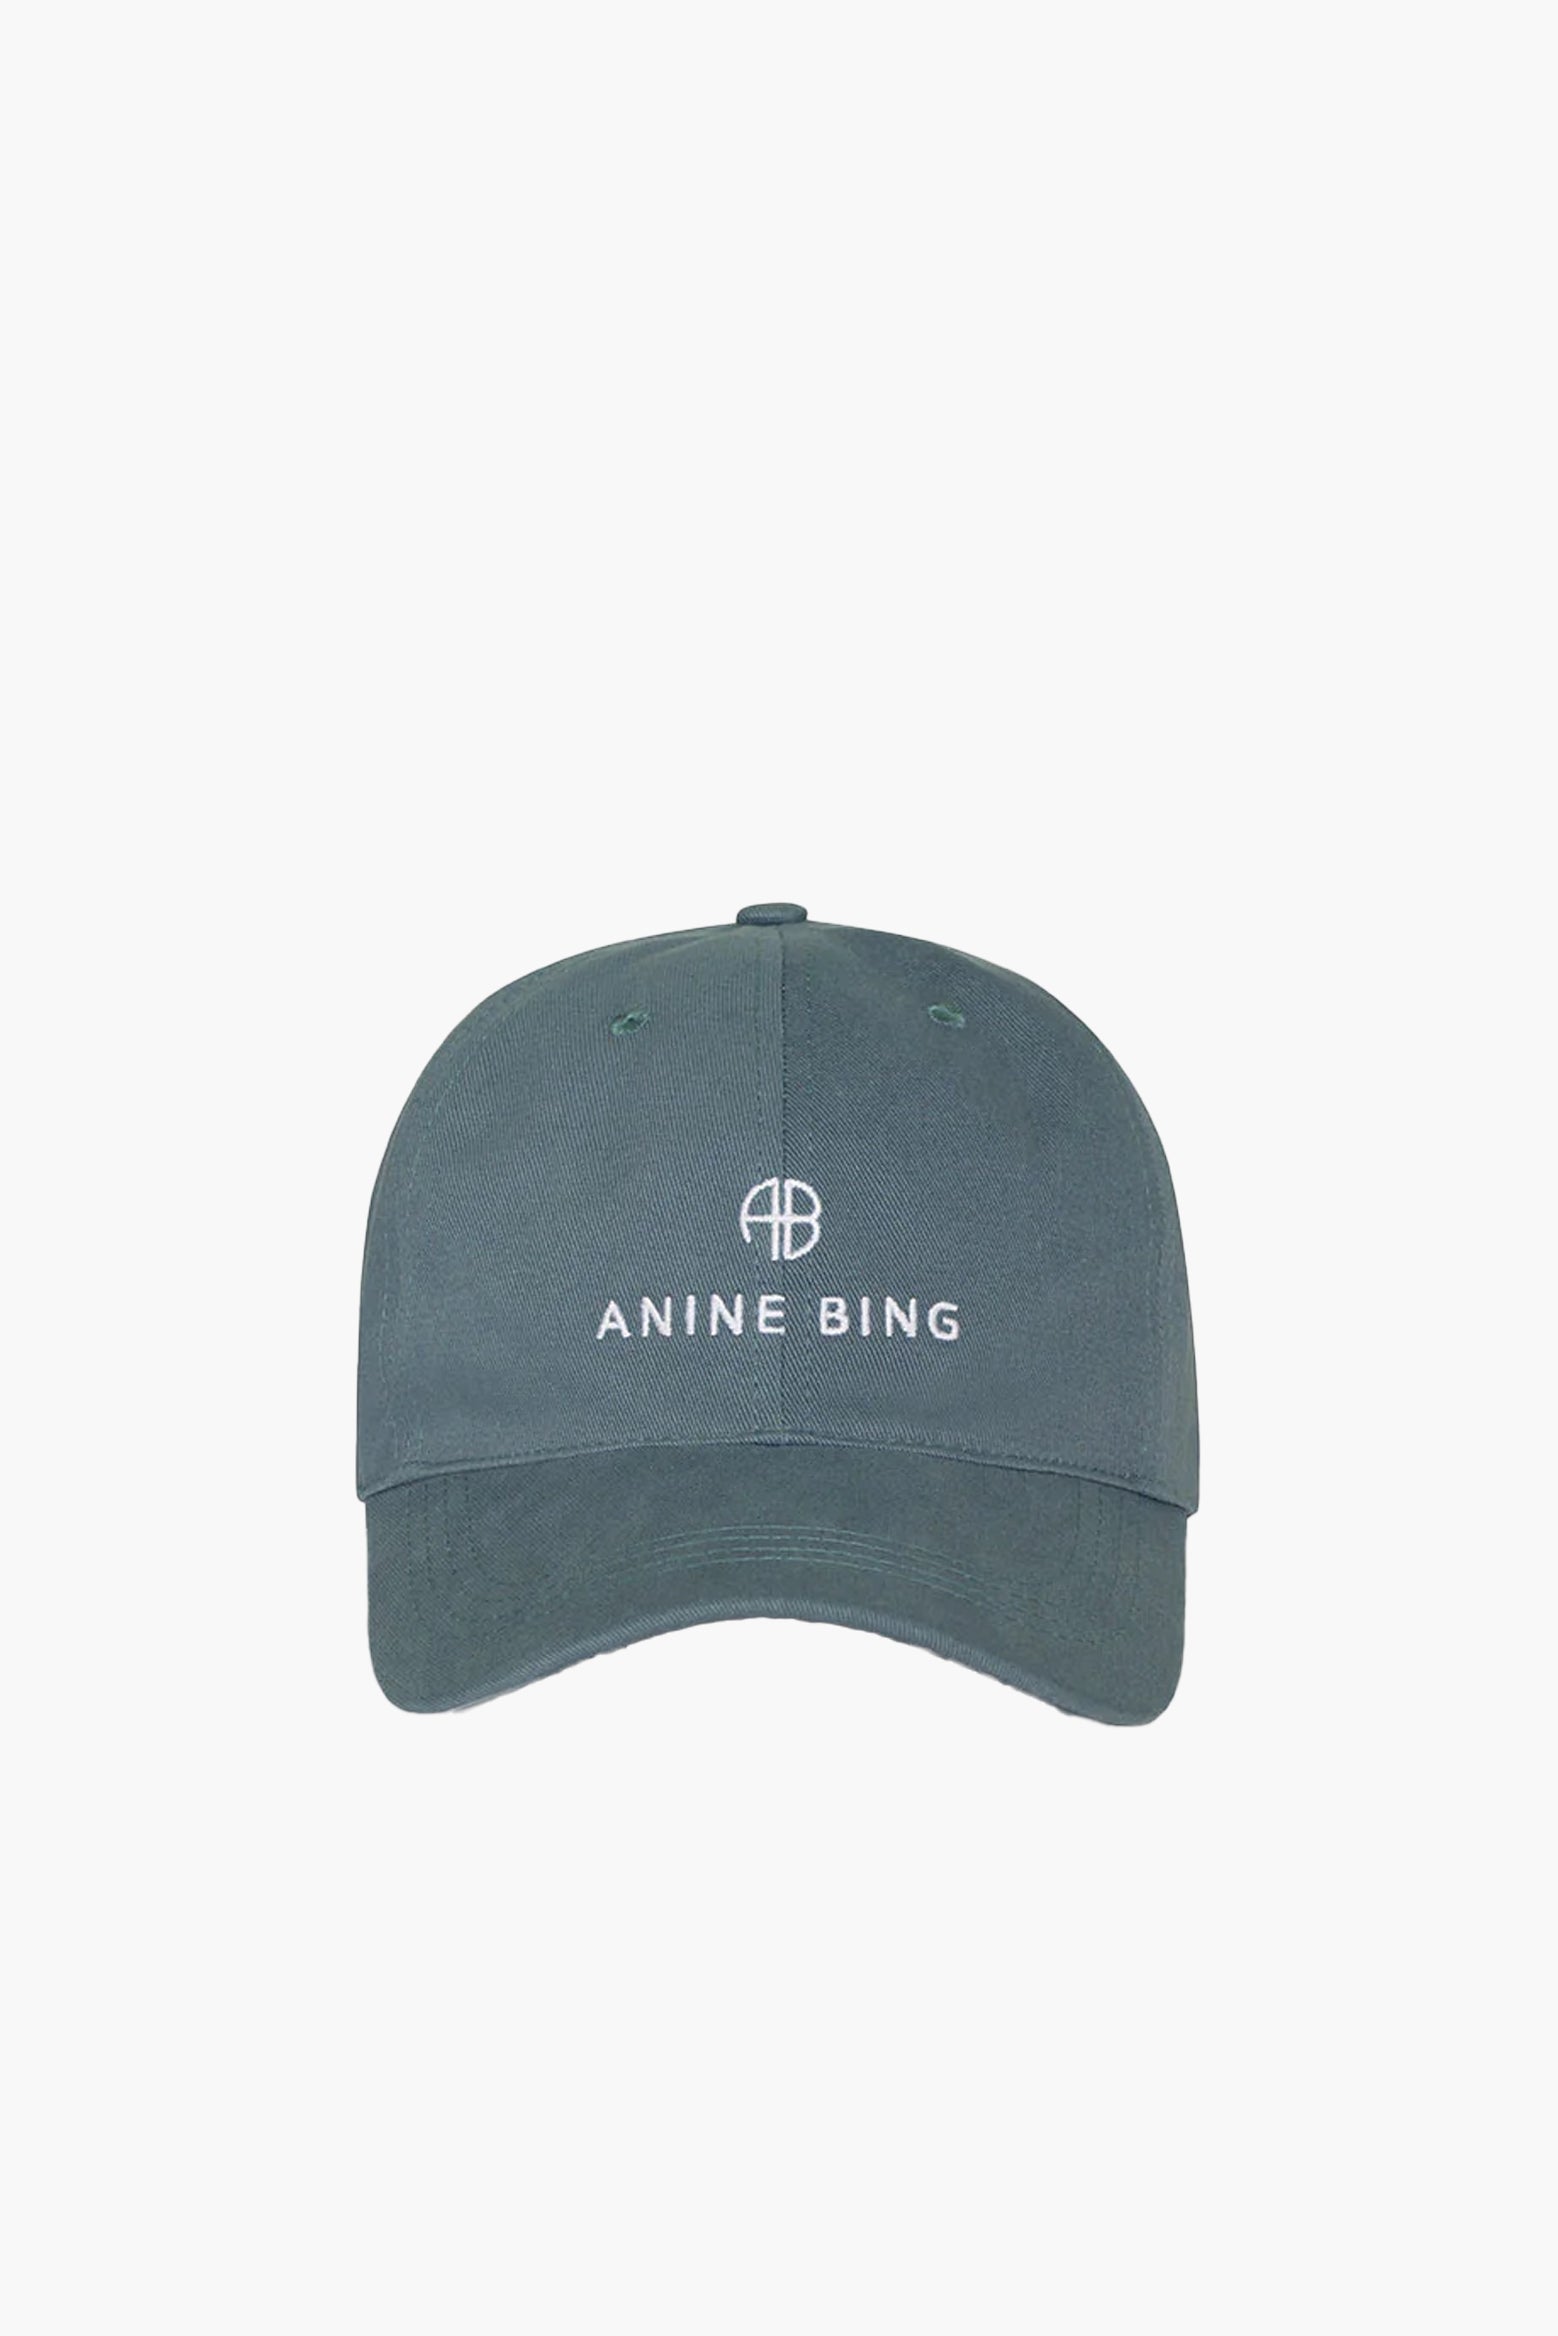 Anine Bing Jeremy Baseball Cap in Green available at The New Trend Australia.